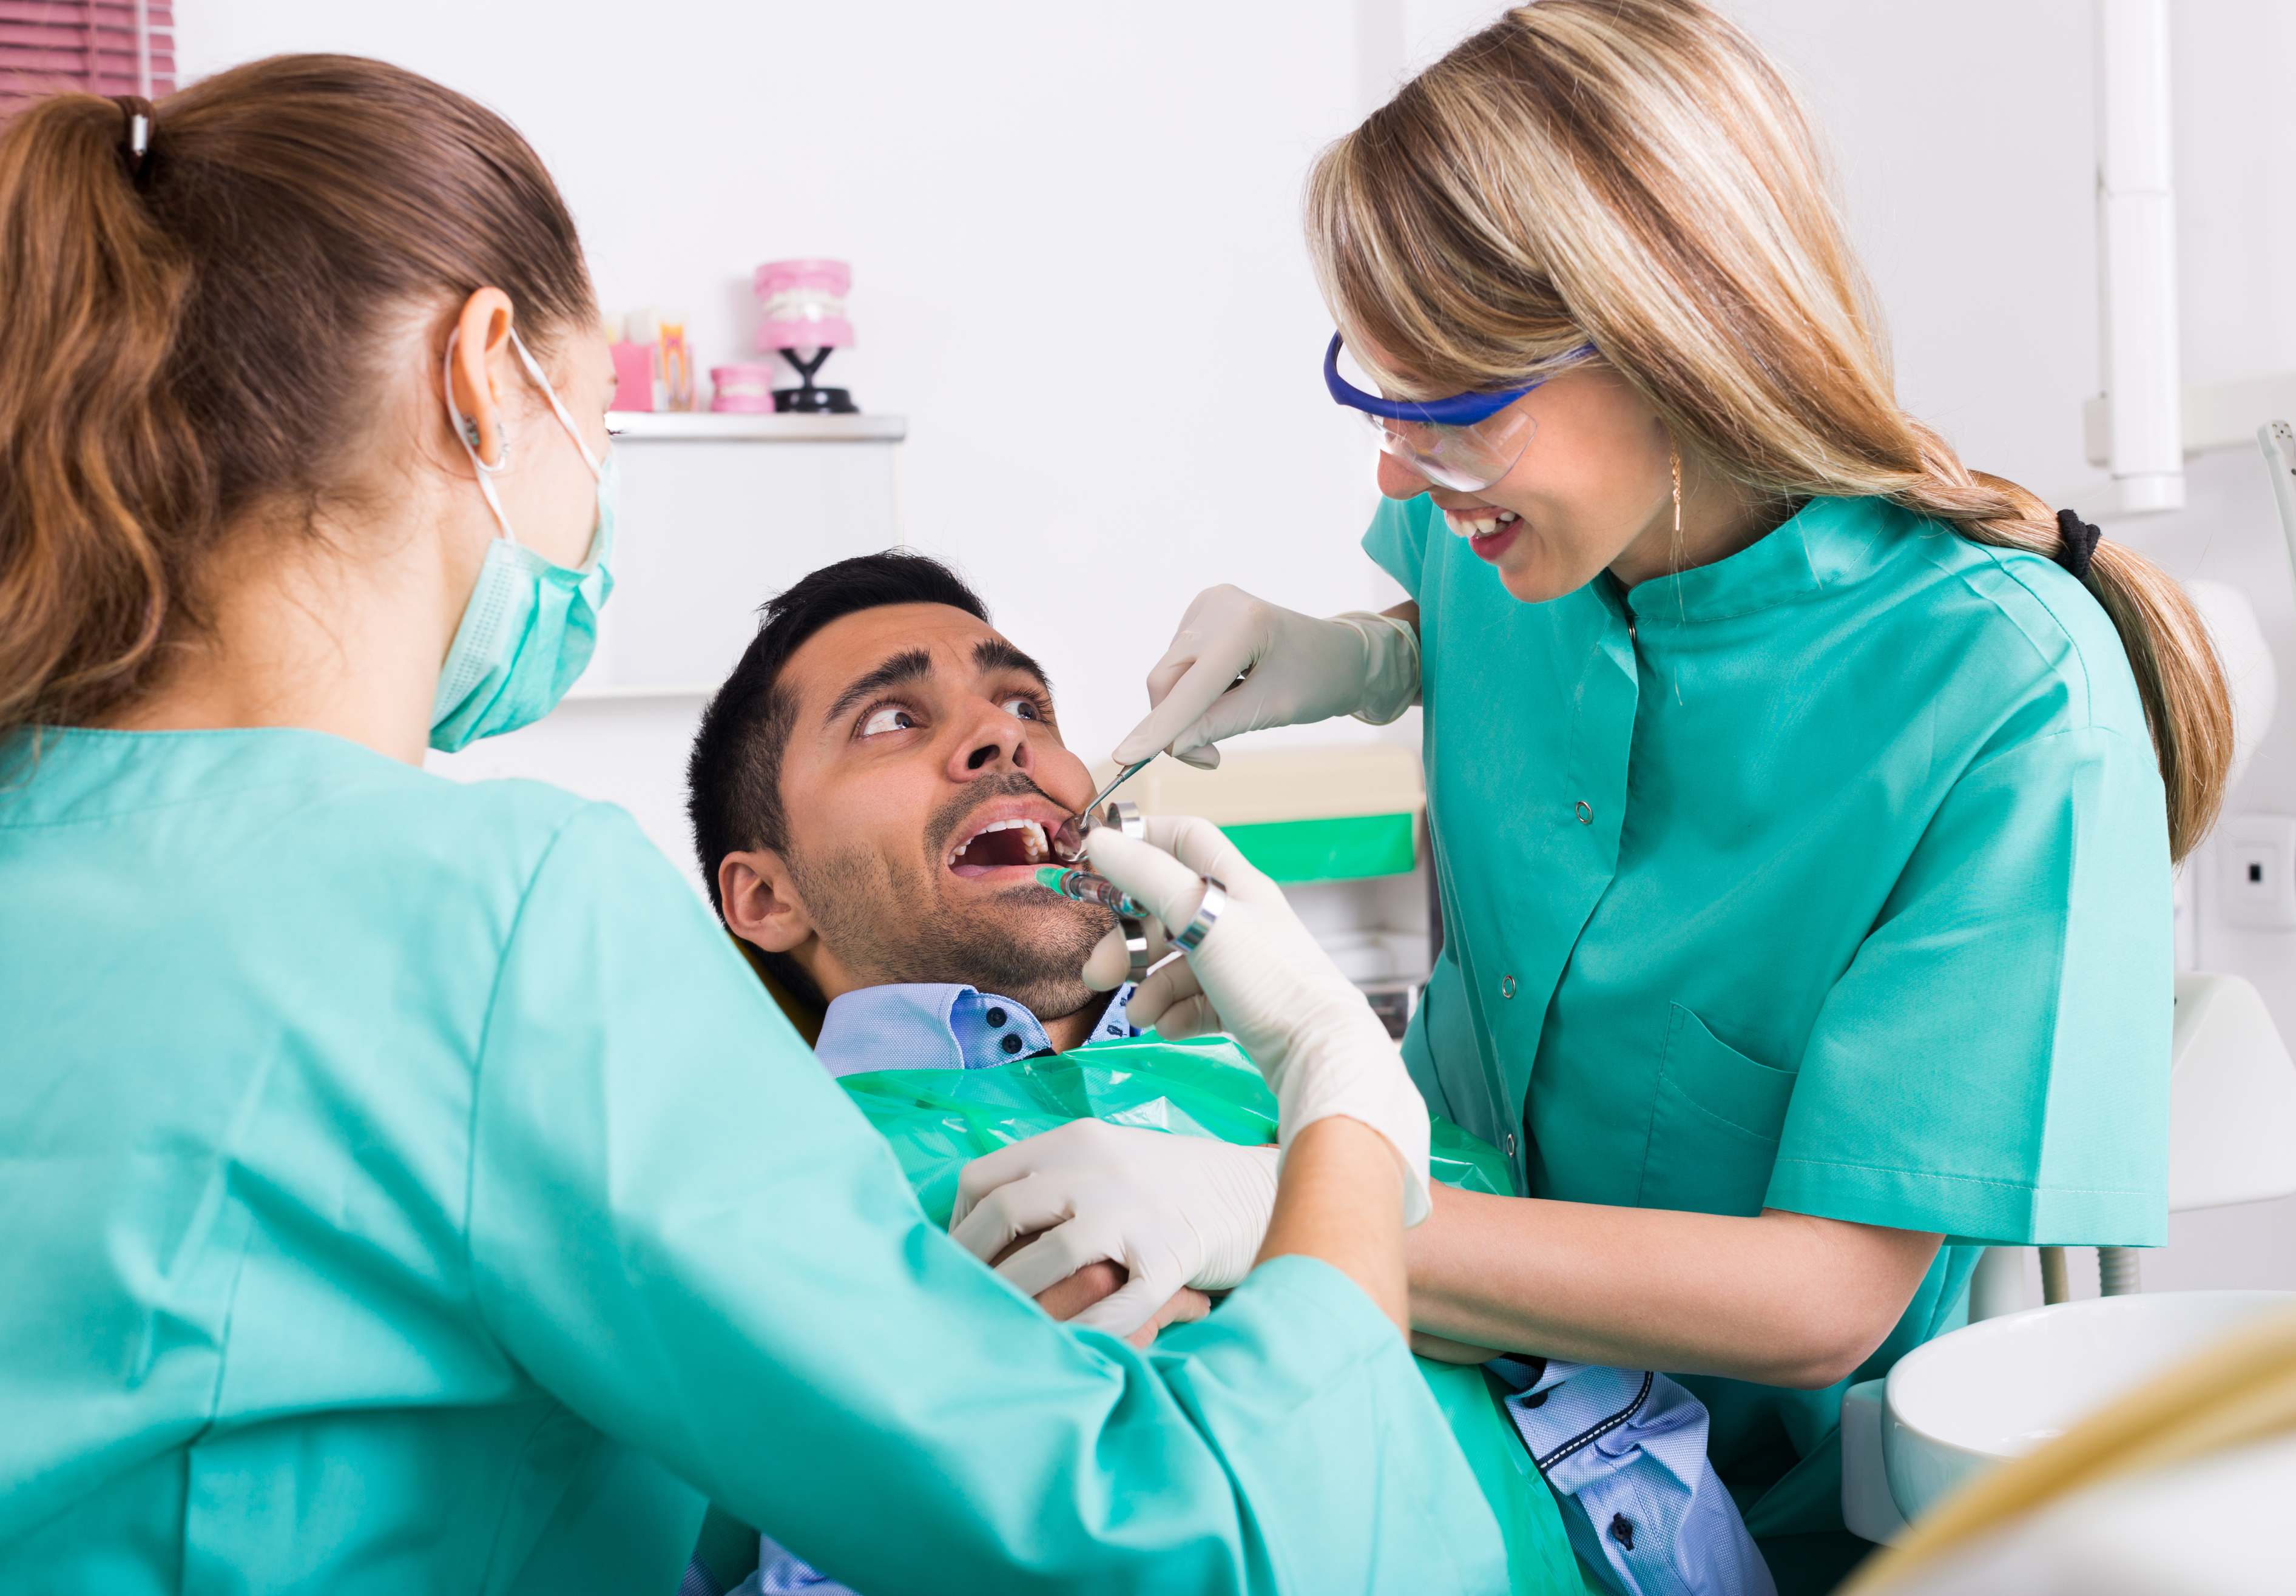 How To Deal With Dental Anxiety with Dominion Ridge Dentistry